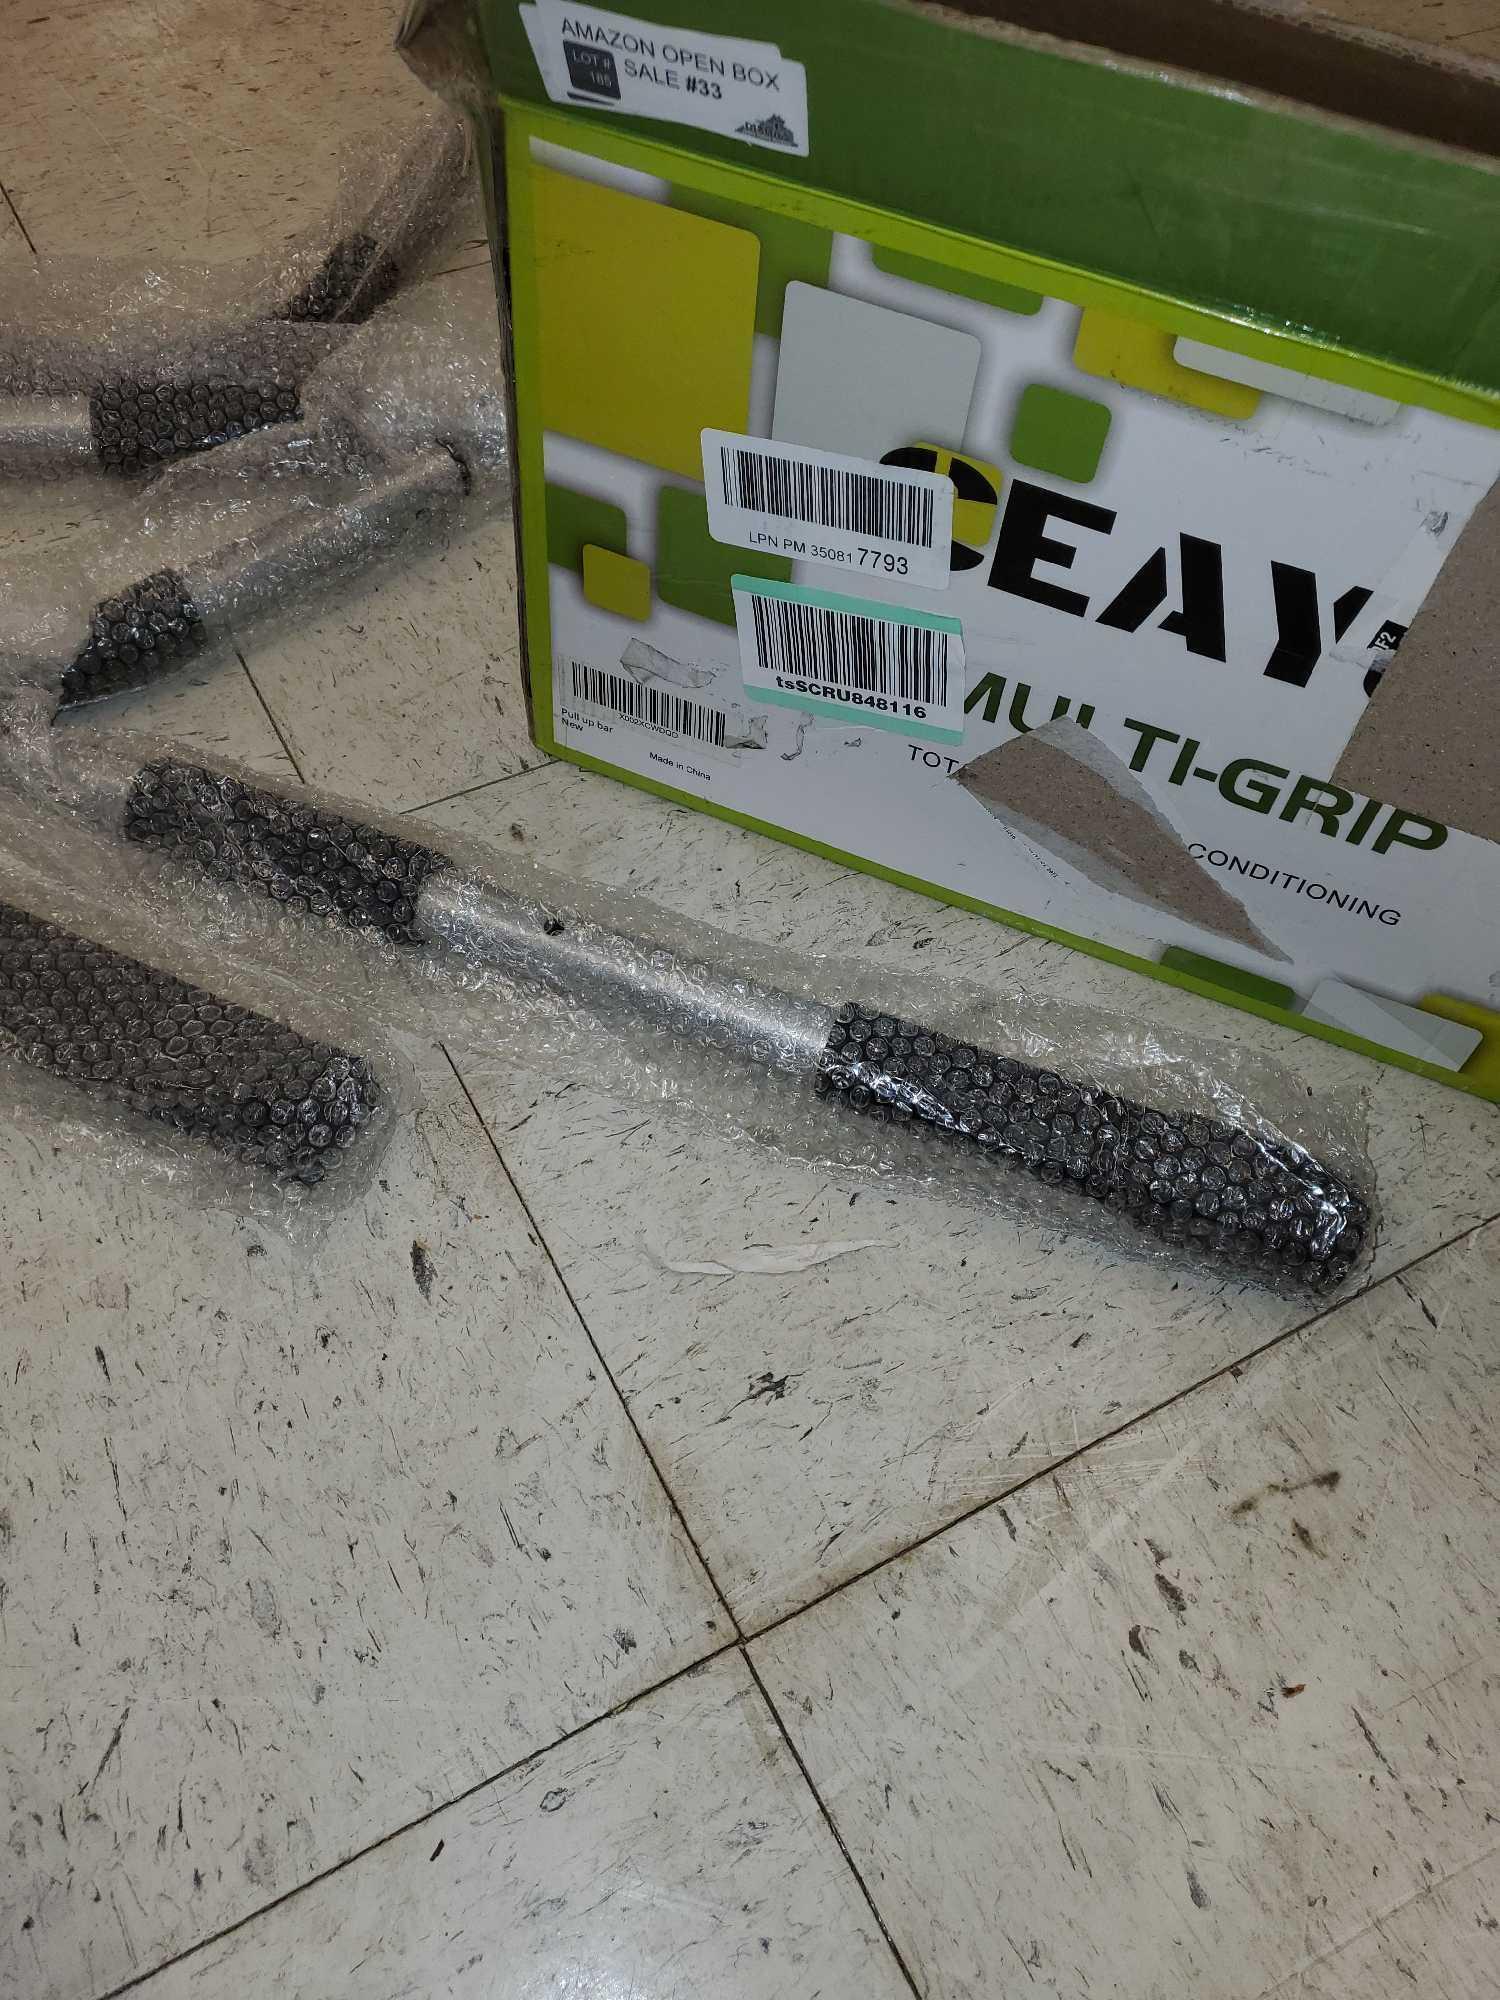 CEAYUN IN DOOR PULL UP BAR, APPEARS TO BE MISSING HARDWARE, PLEASE SEE THE PICTURES FOR MORE